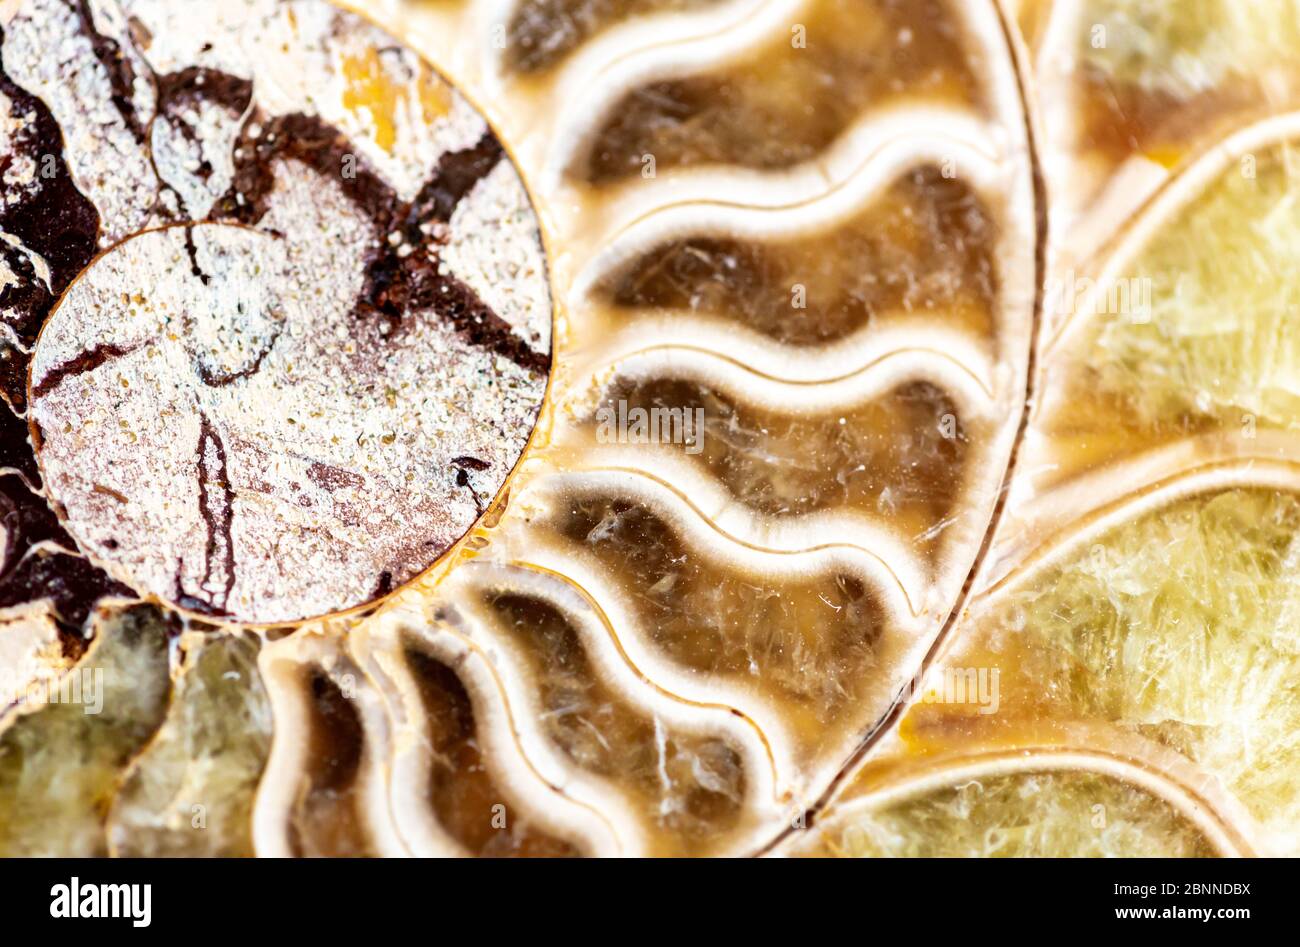 close up of an ammonite fossil Stock Photo